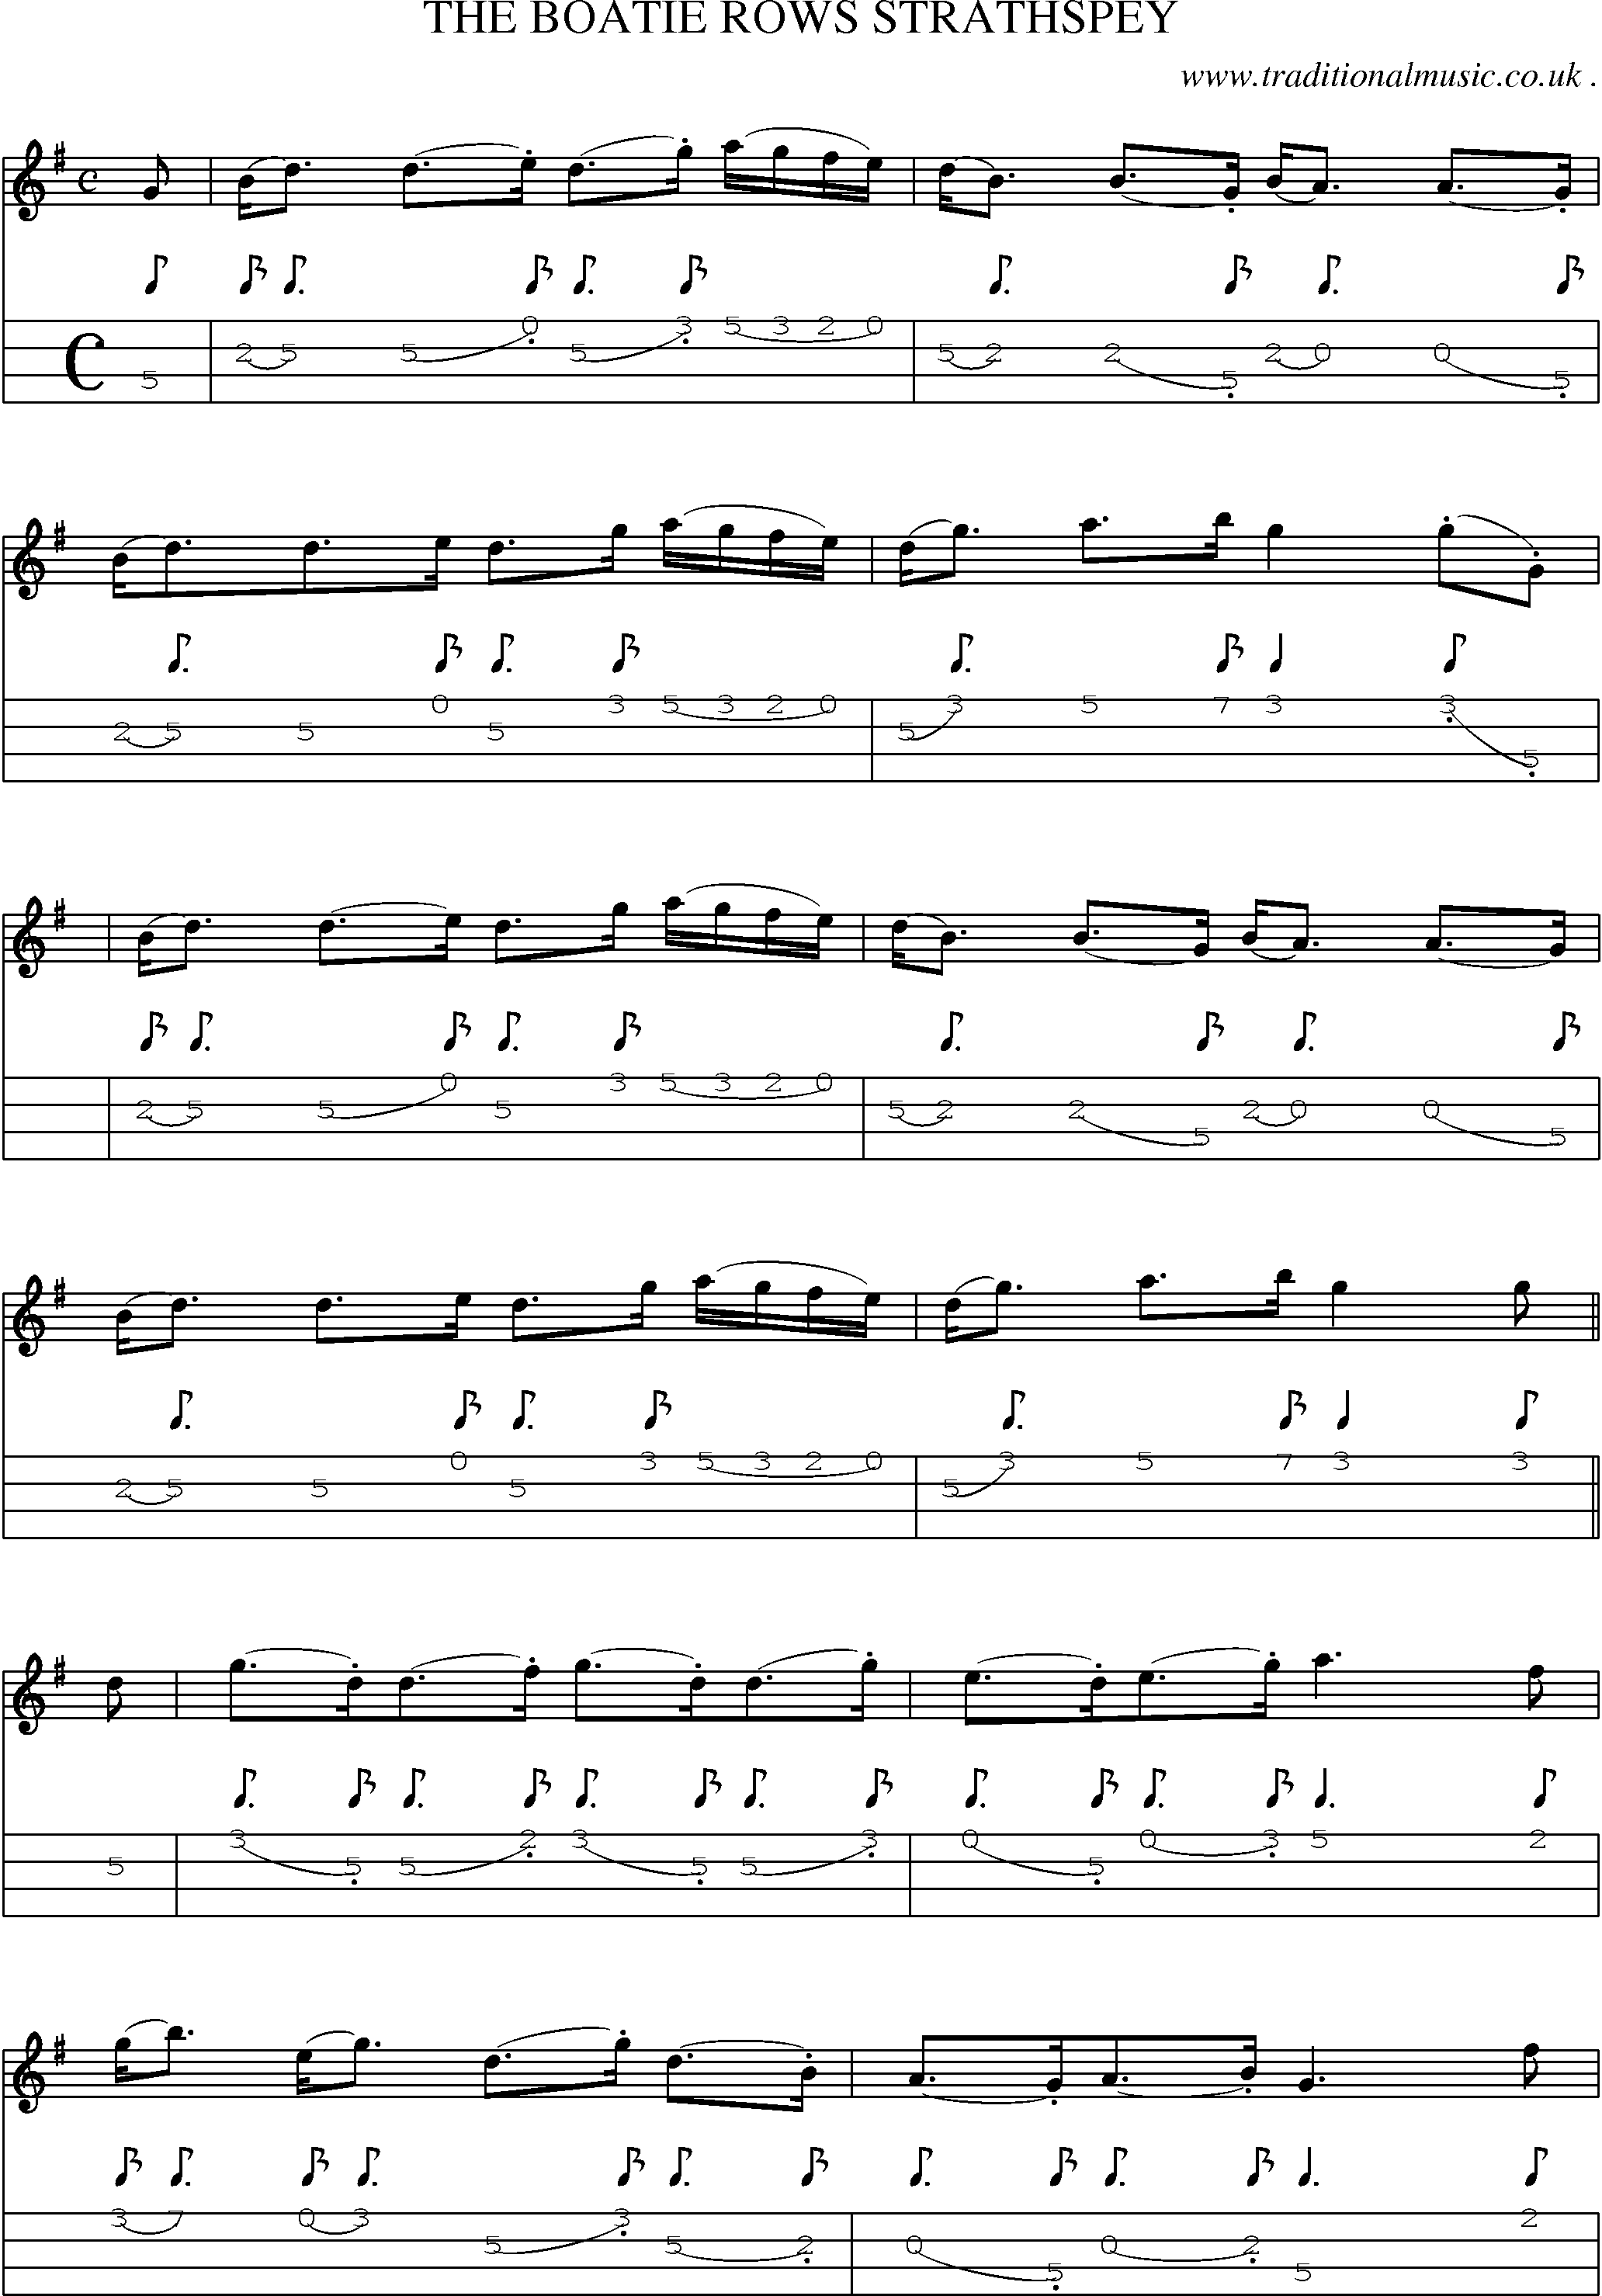 Sheet-Music and Mandolin Tabs for The Boatie Rows Strathspey